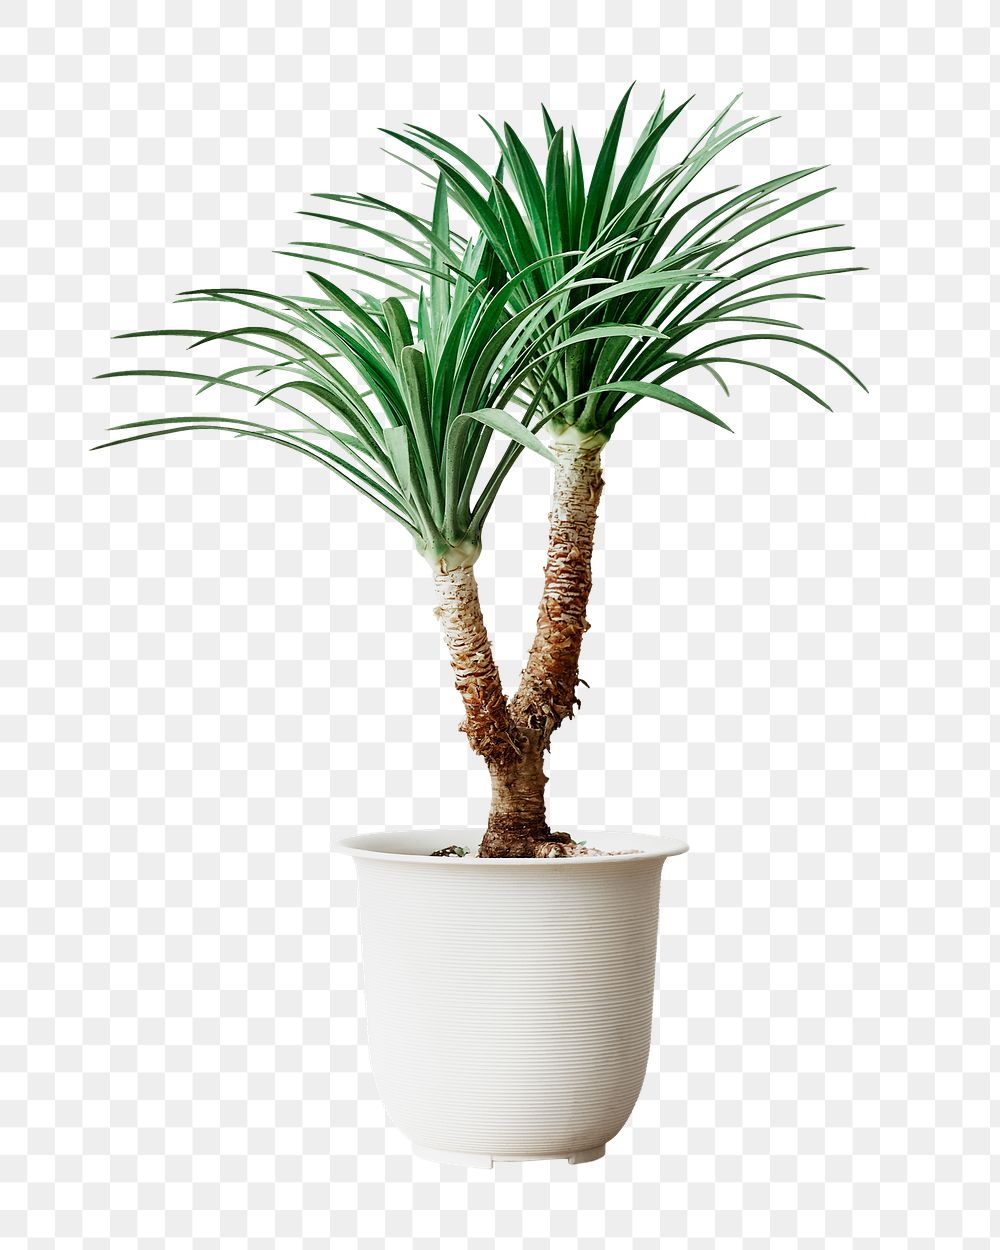 Agave palm tree png sticker, transparent background